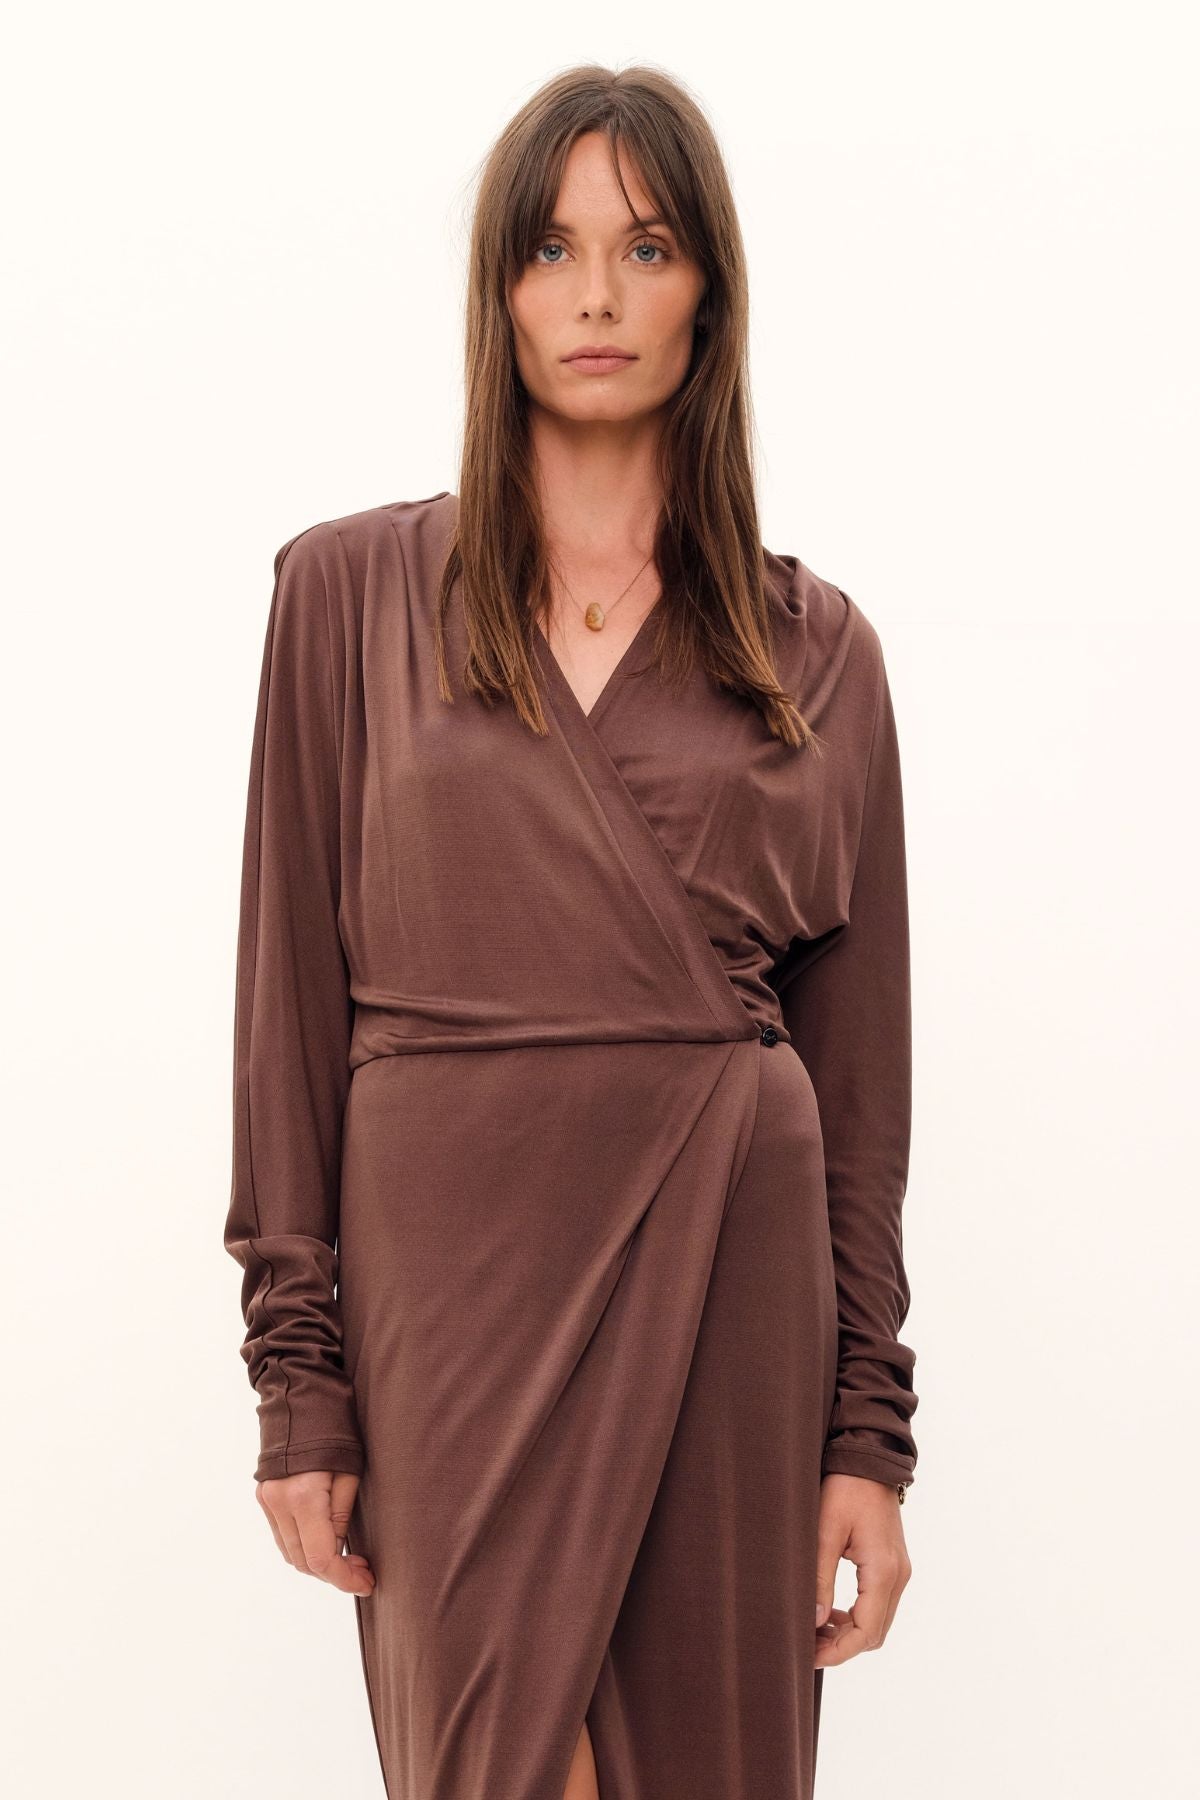 Flowing with sophistication, the Aphrodite Wrap Dress is exquisitely crafted from a luxurious blend of silk viscose jersey in coco. Delicately hugging the curves of the figure, the dress features a cinched waistline, draping down to a midi length with drop-shoulder detailing. Subtly enhancing the silhouette, the feather-light fabric features a relaxed cut, providing an effortless elegance. For an added touch of elegance, add the Novel belt for extra definition. Perfect for both work and evening events.